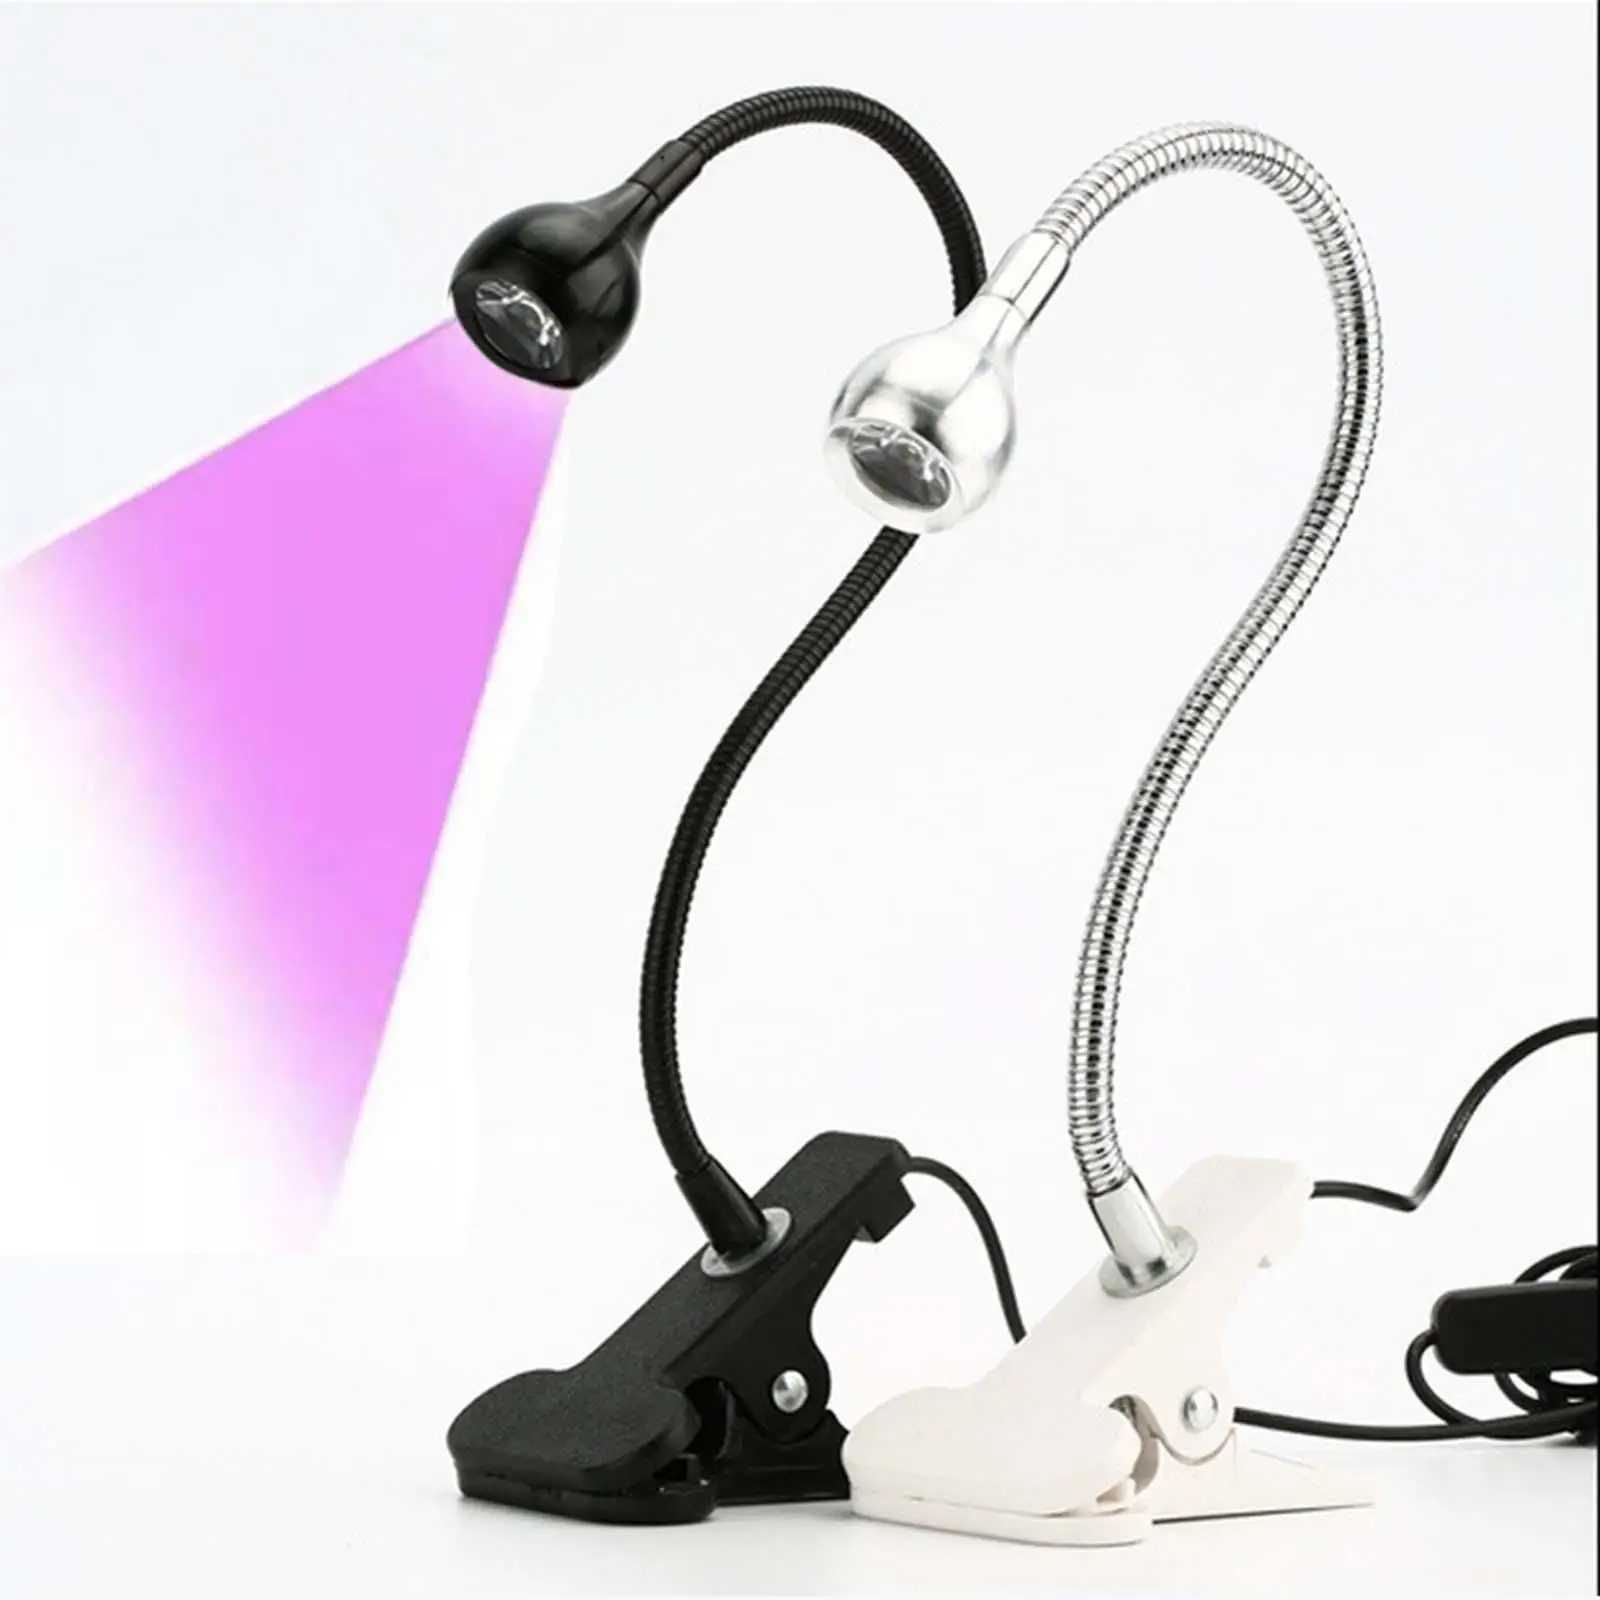 Ultraviolet Curing LED Light 395nm with Clamp UV LED Light for Gel Nail Curing Phone Repair